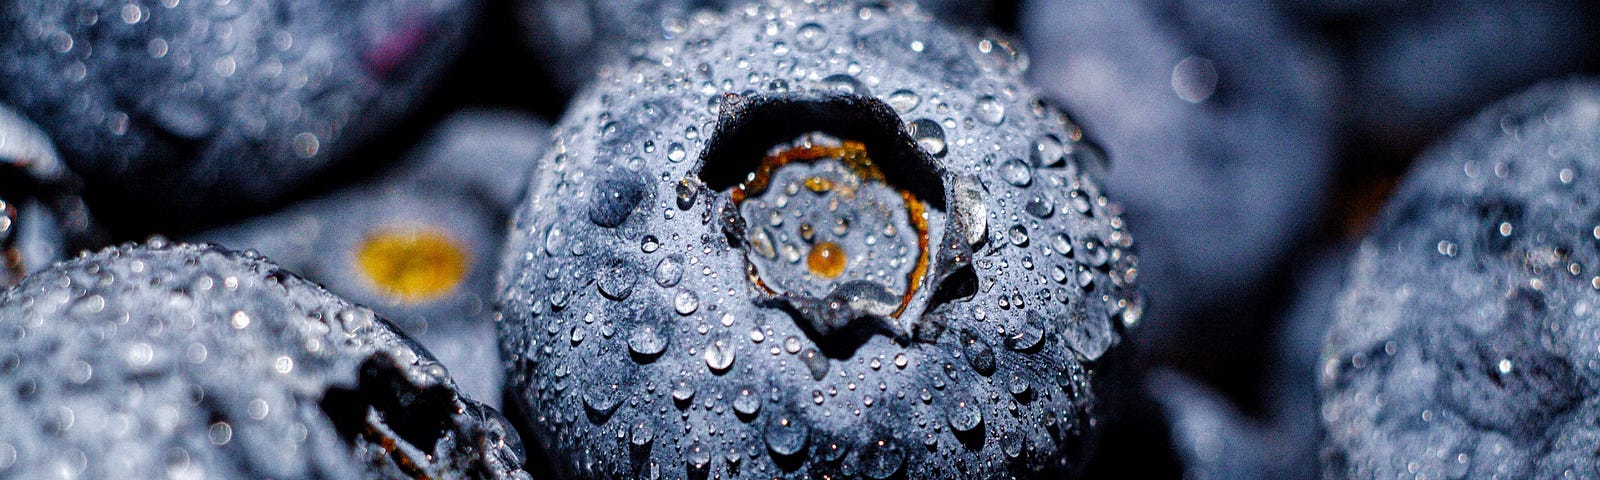 closeup of freshly washed blueberries with water droplets fill the photo